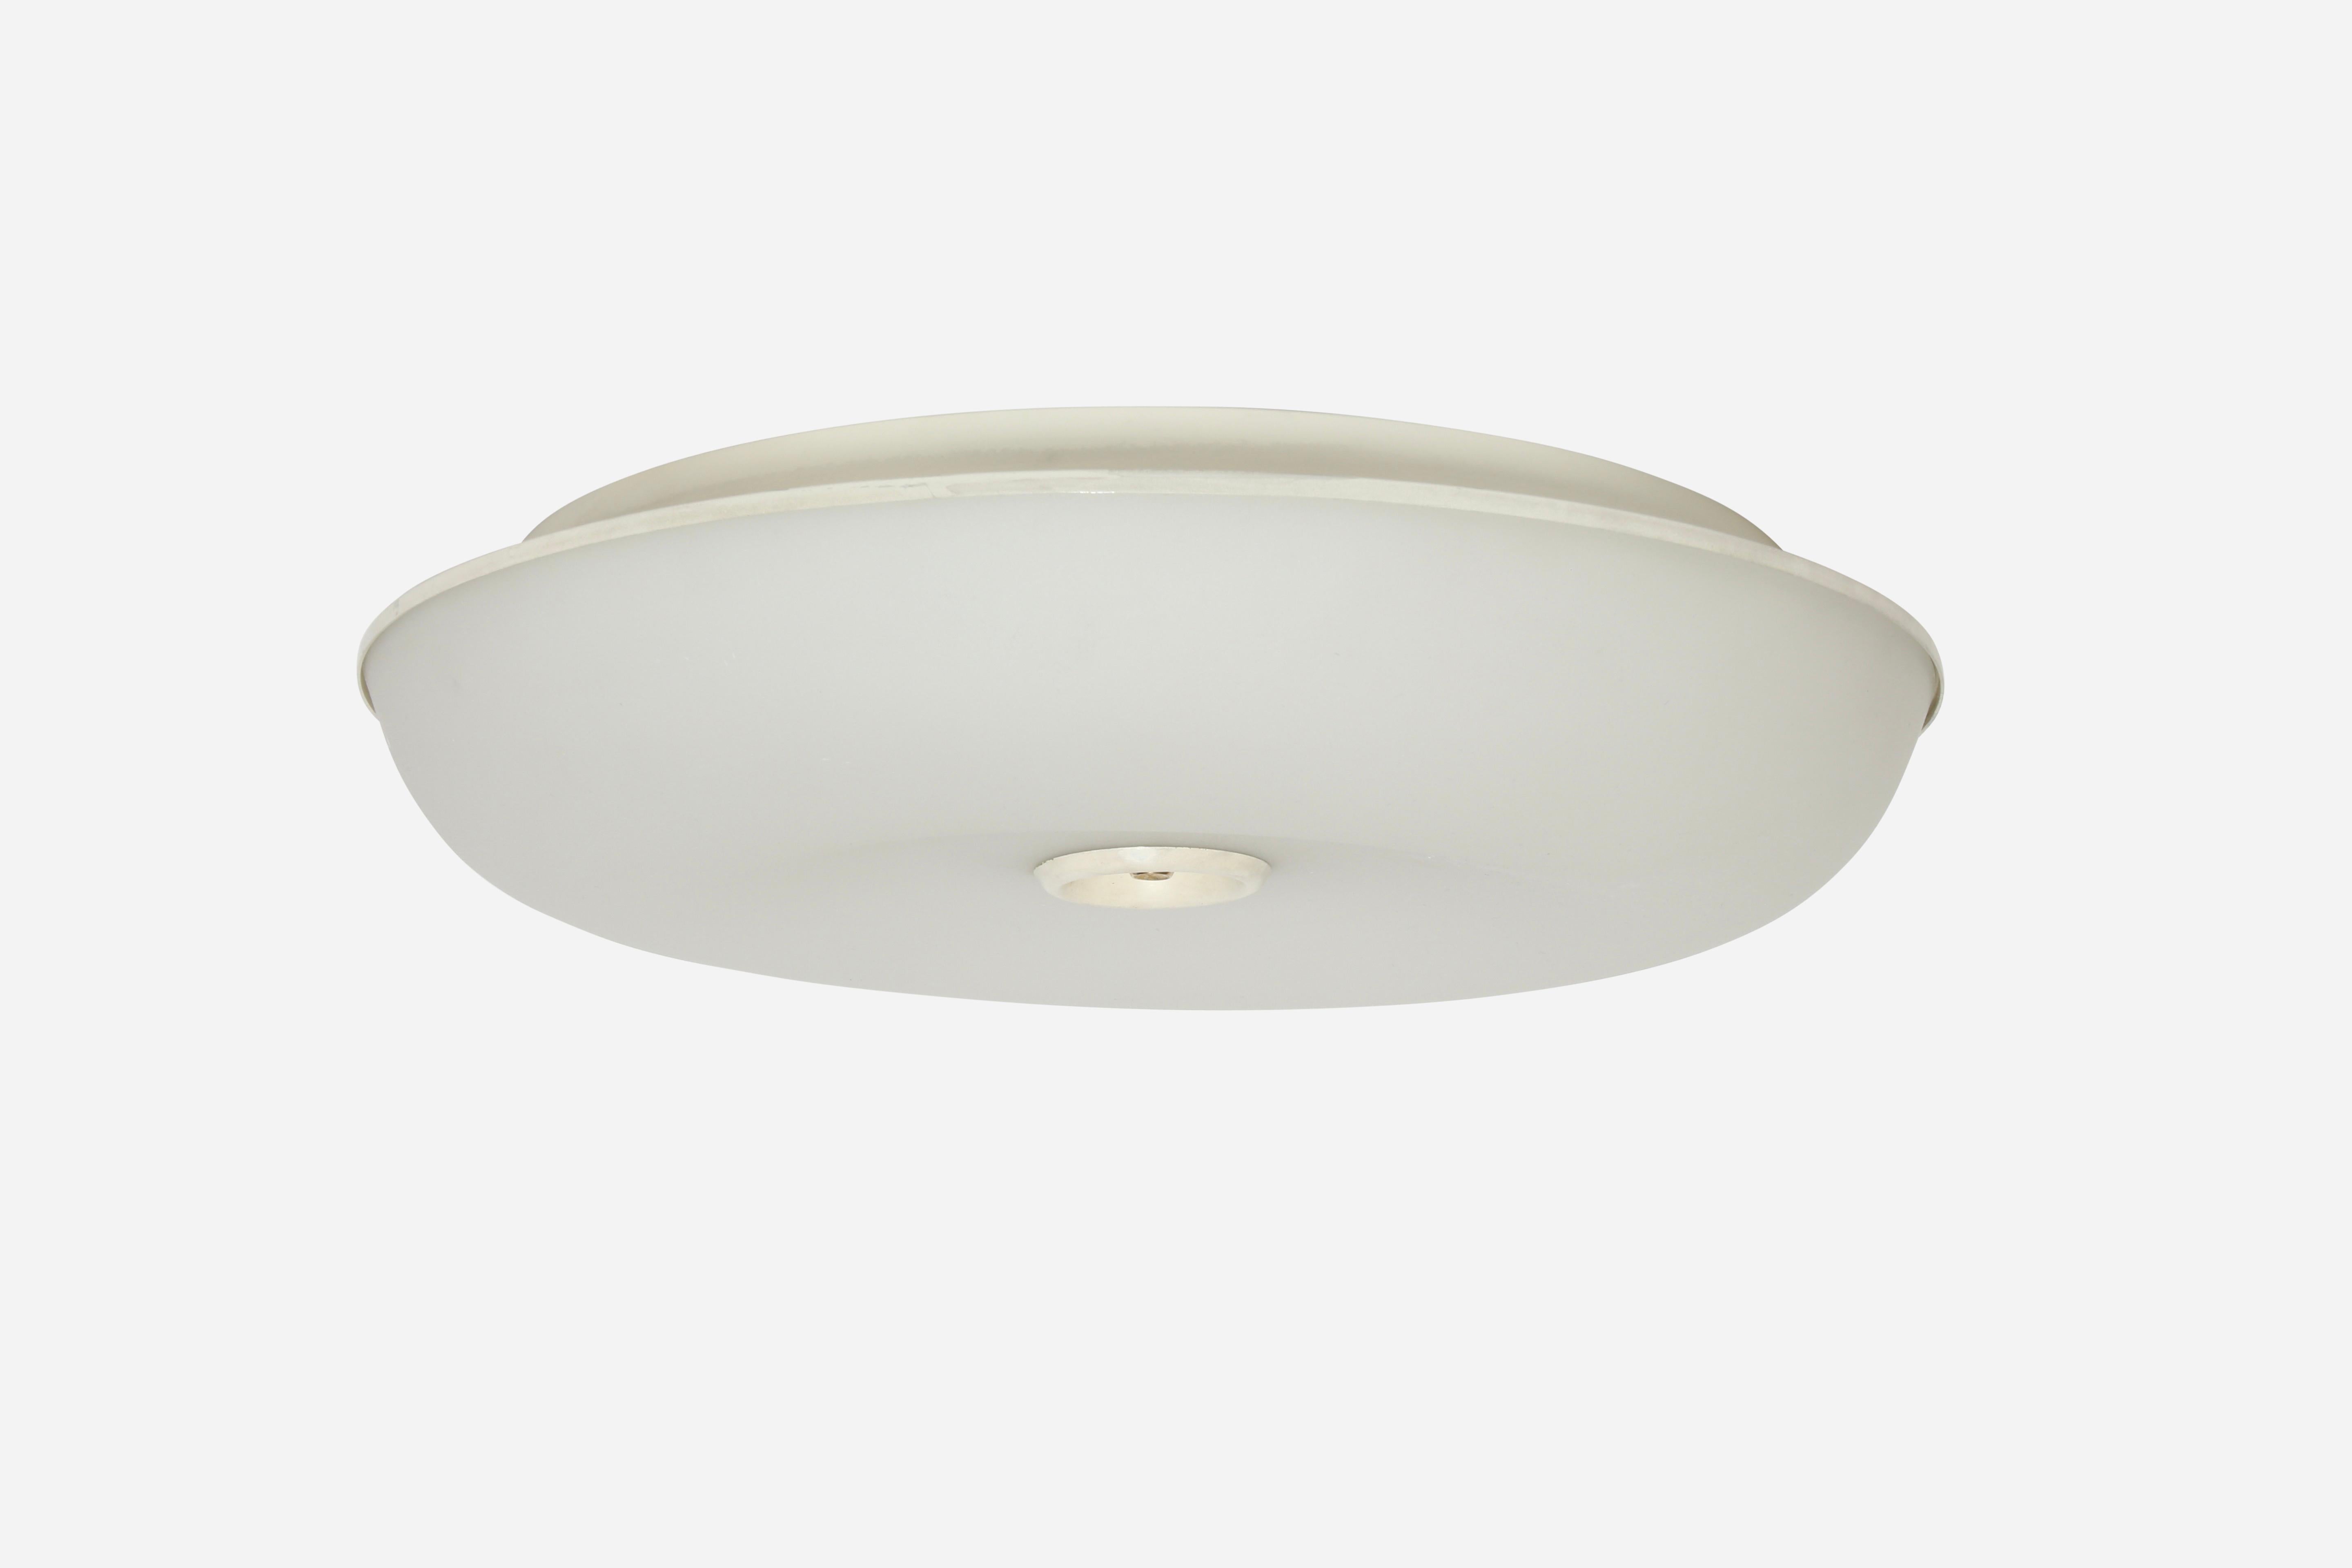 Fontana Arte attributed flush mount ceiling light.
Made in Italy in 1960s.
Matte opaline glass, enameled metal.
Takes 3 candelabra sockets
Complimentary US rewiring upon request.

We take pride in bringing vintage fixtures to their full glory